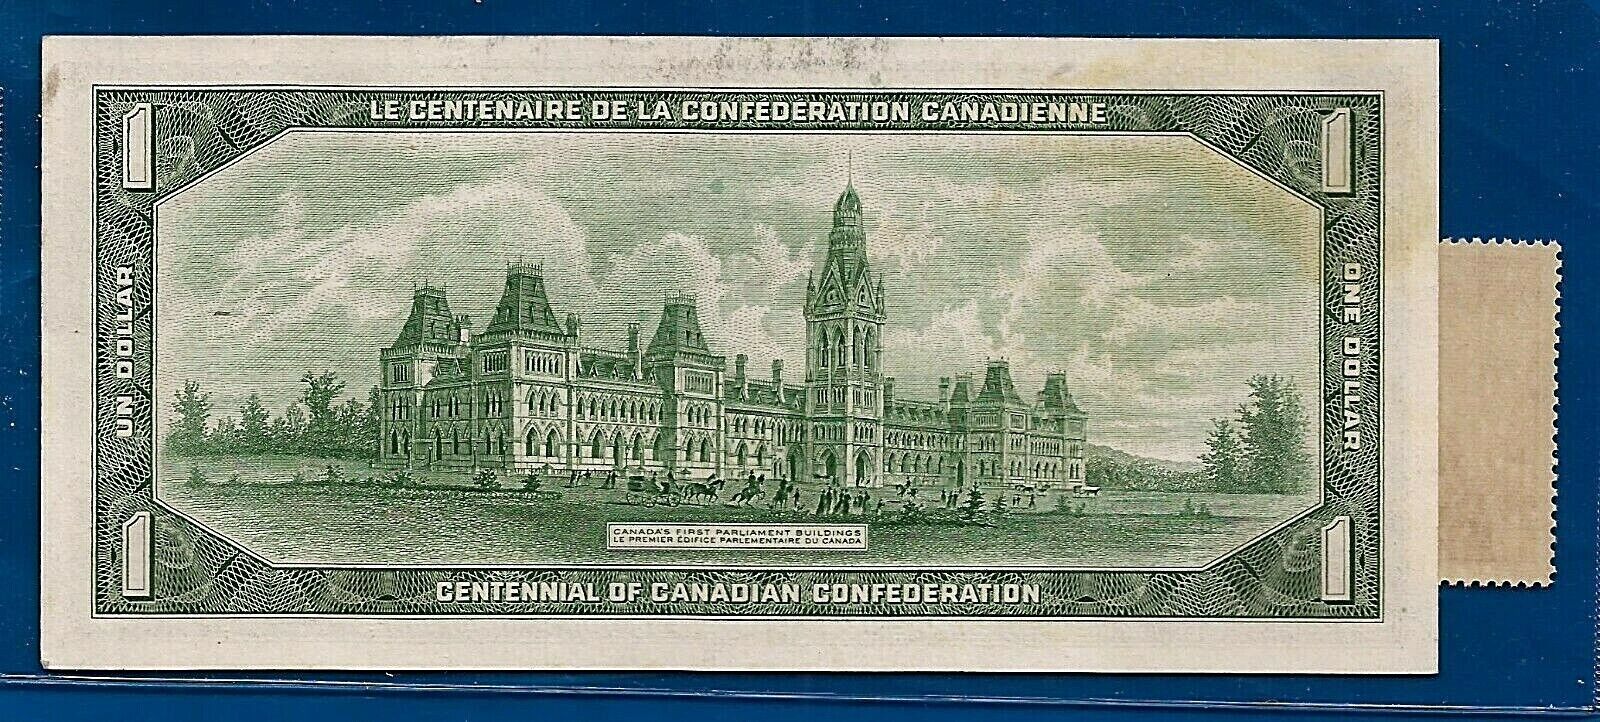 CANADA 1867 1067 Canadian one 1 DOLLAR BILL NOTE with QE II stamp E